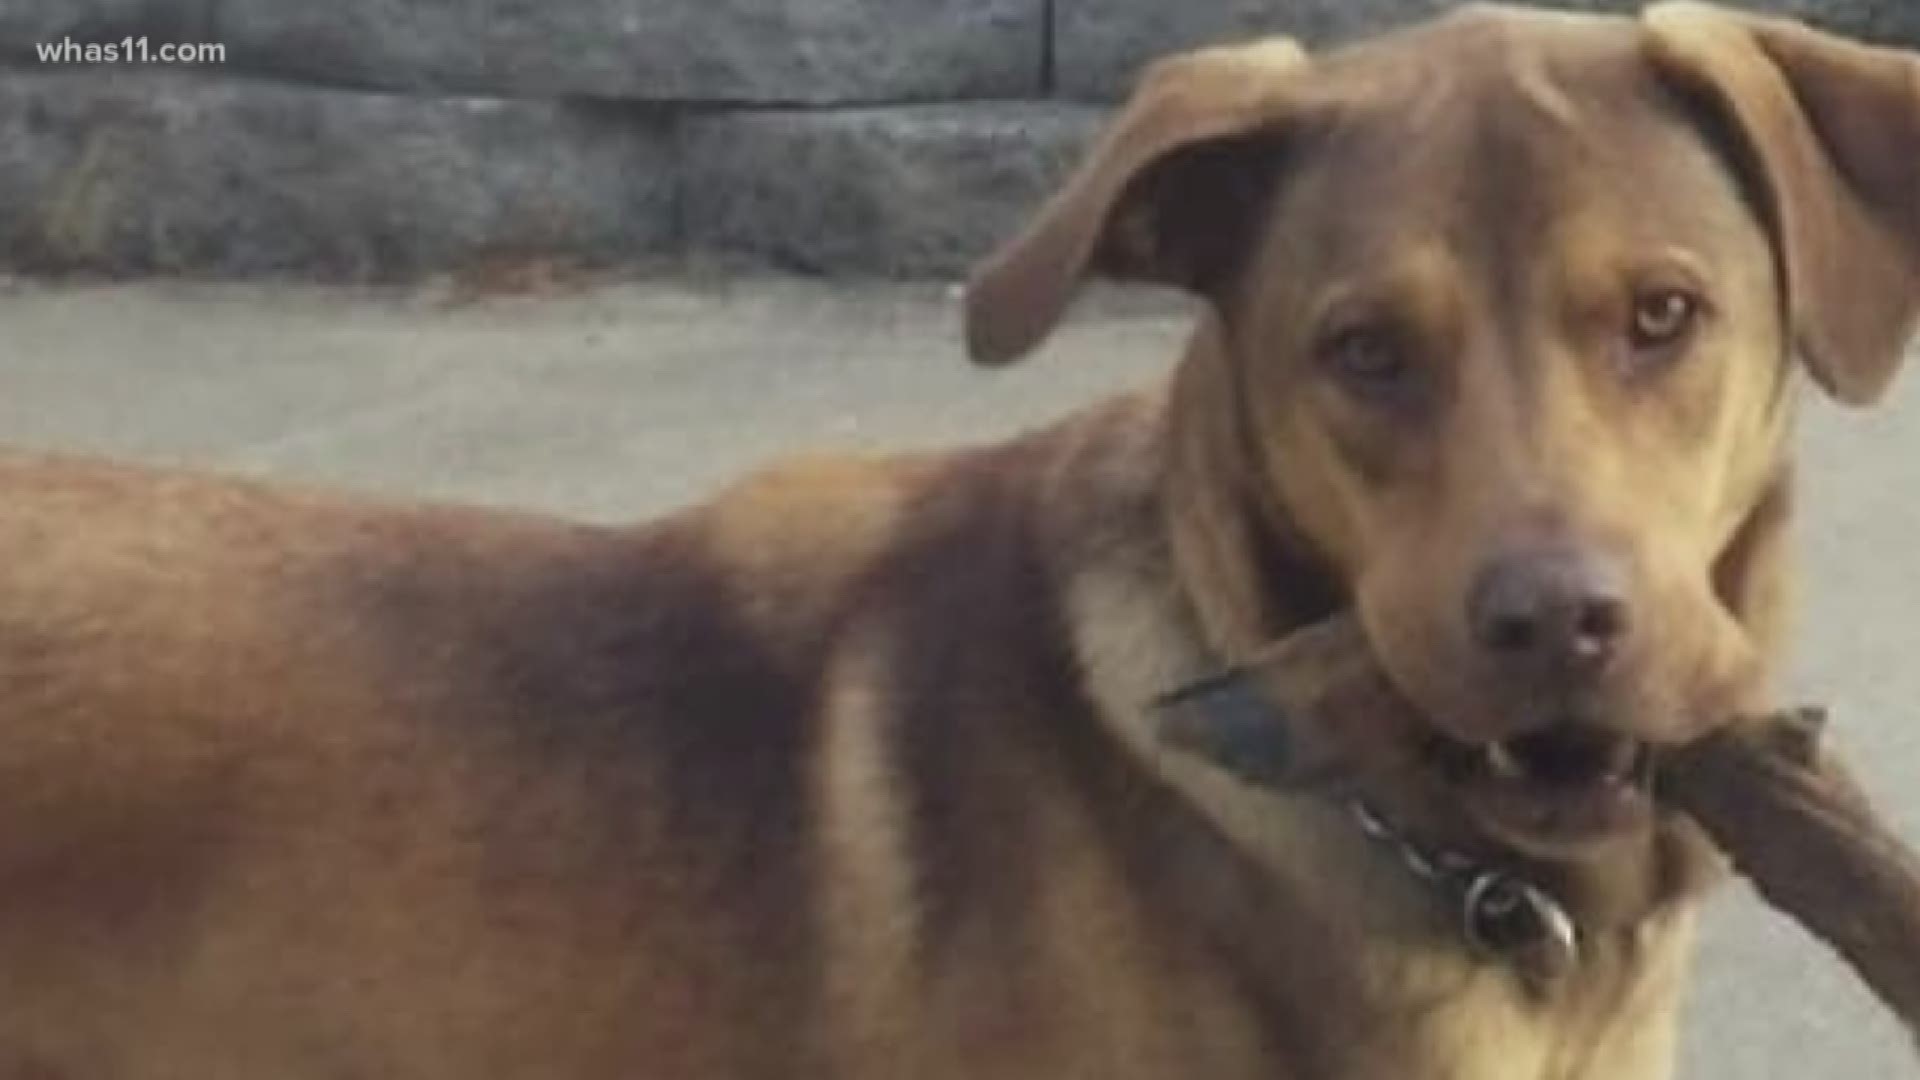 A So. Indiana woman's dog was shot and killed on Thanksgiving.